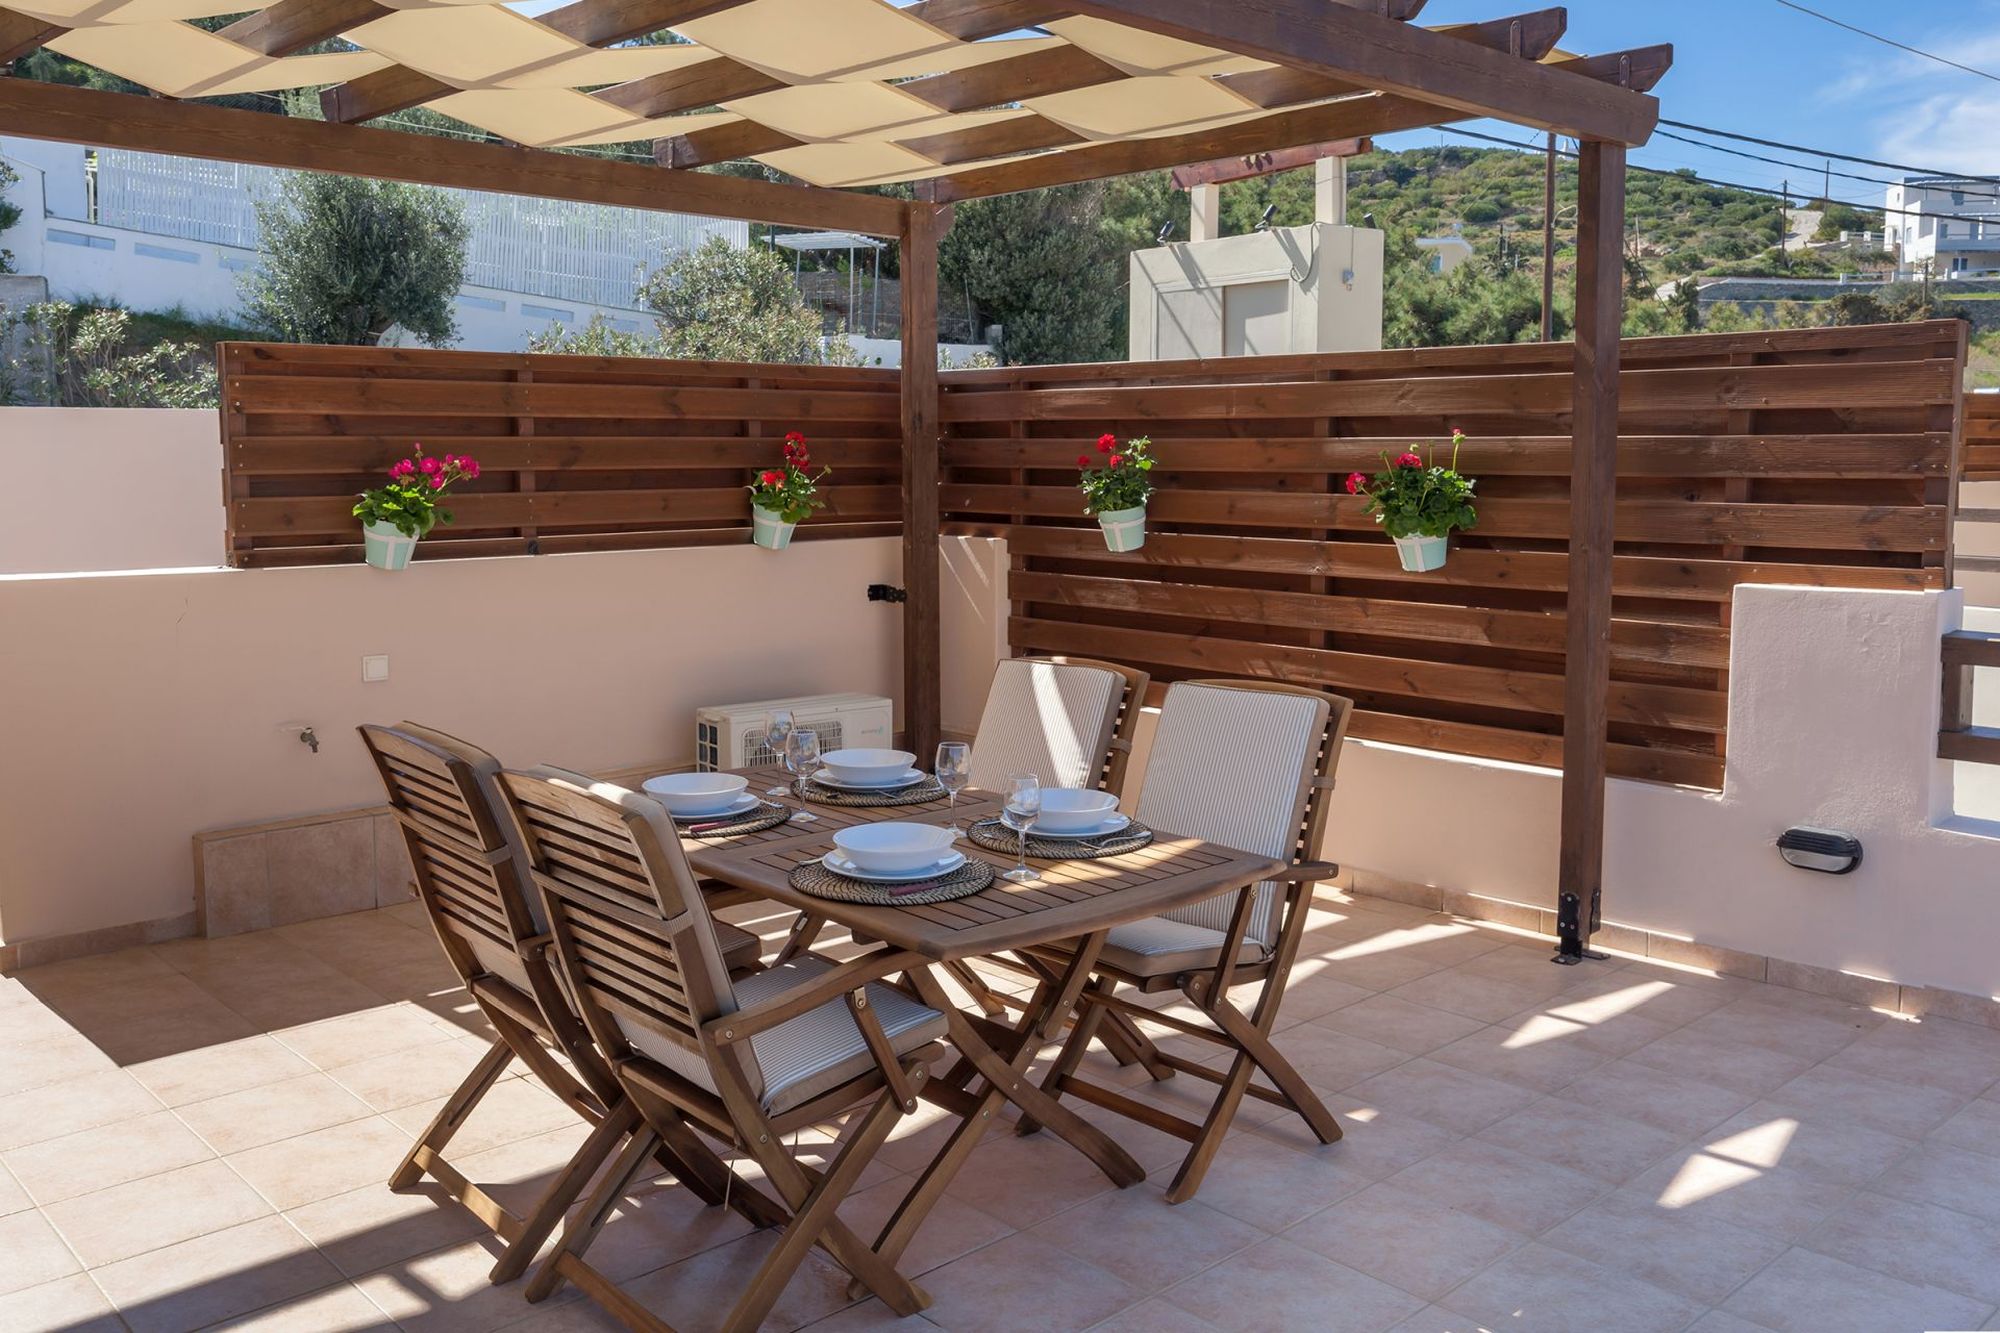 Veranda with pergola and dining table with white tableware set and four chairs.